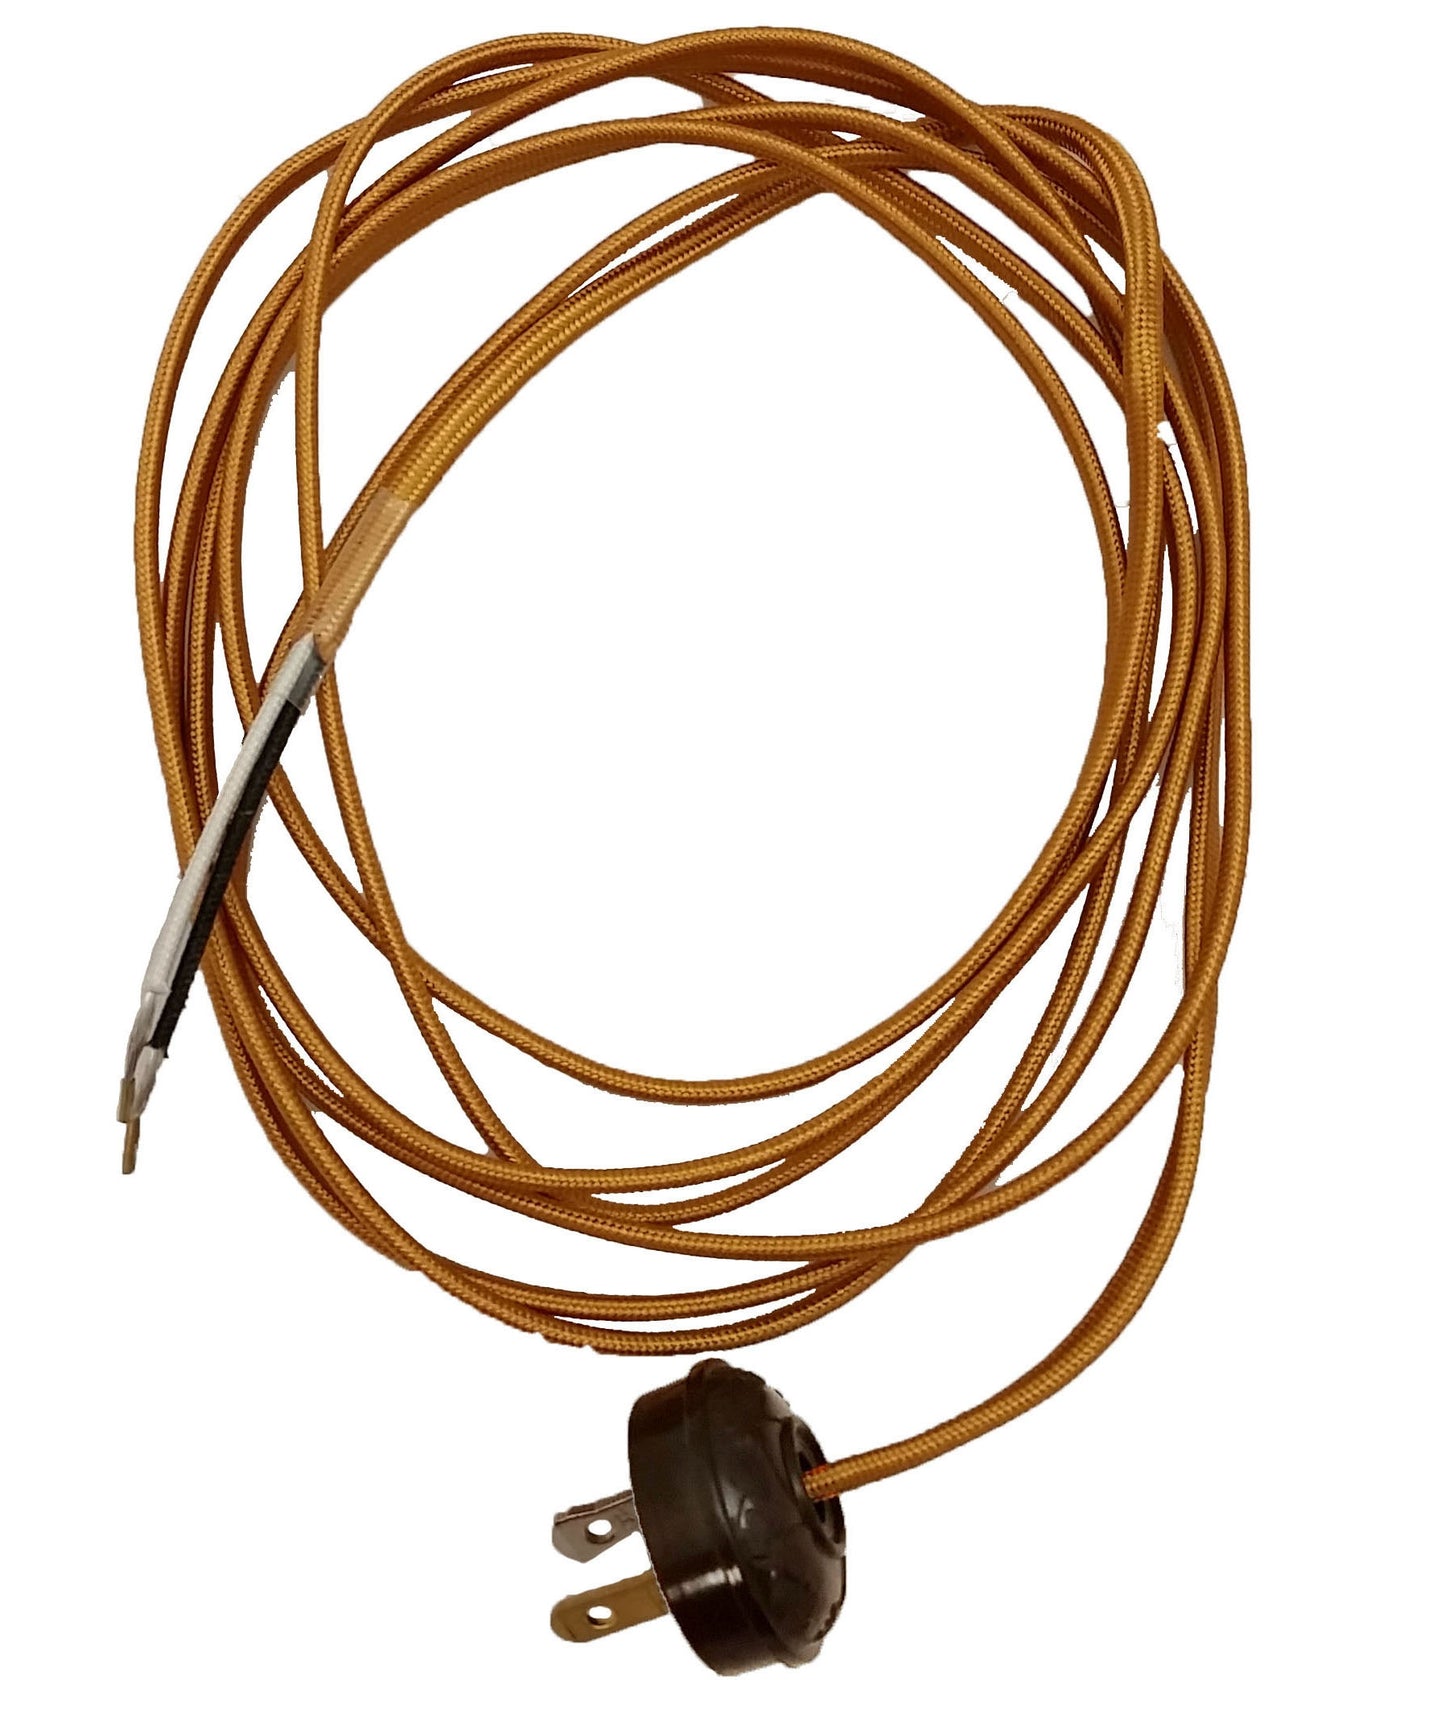 8' Flat 2-Wire Cloth Covered Cord & Plug, Vintage Light Lamp Rewire Kit,  Rayon